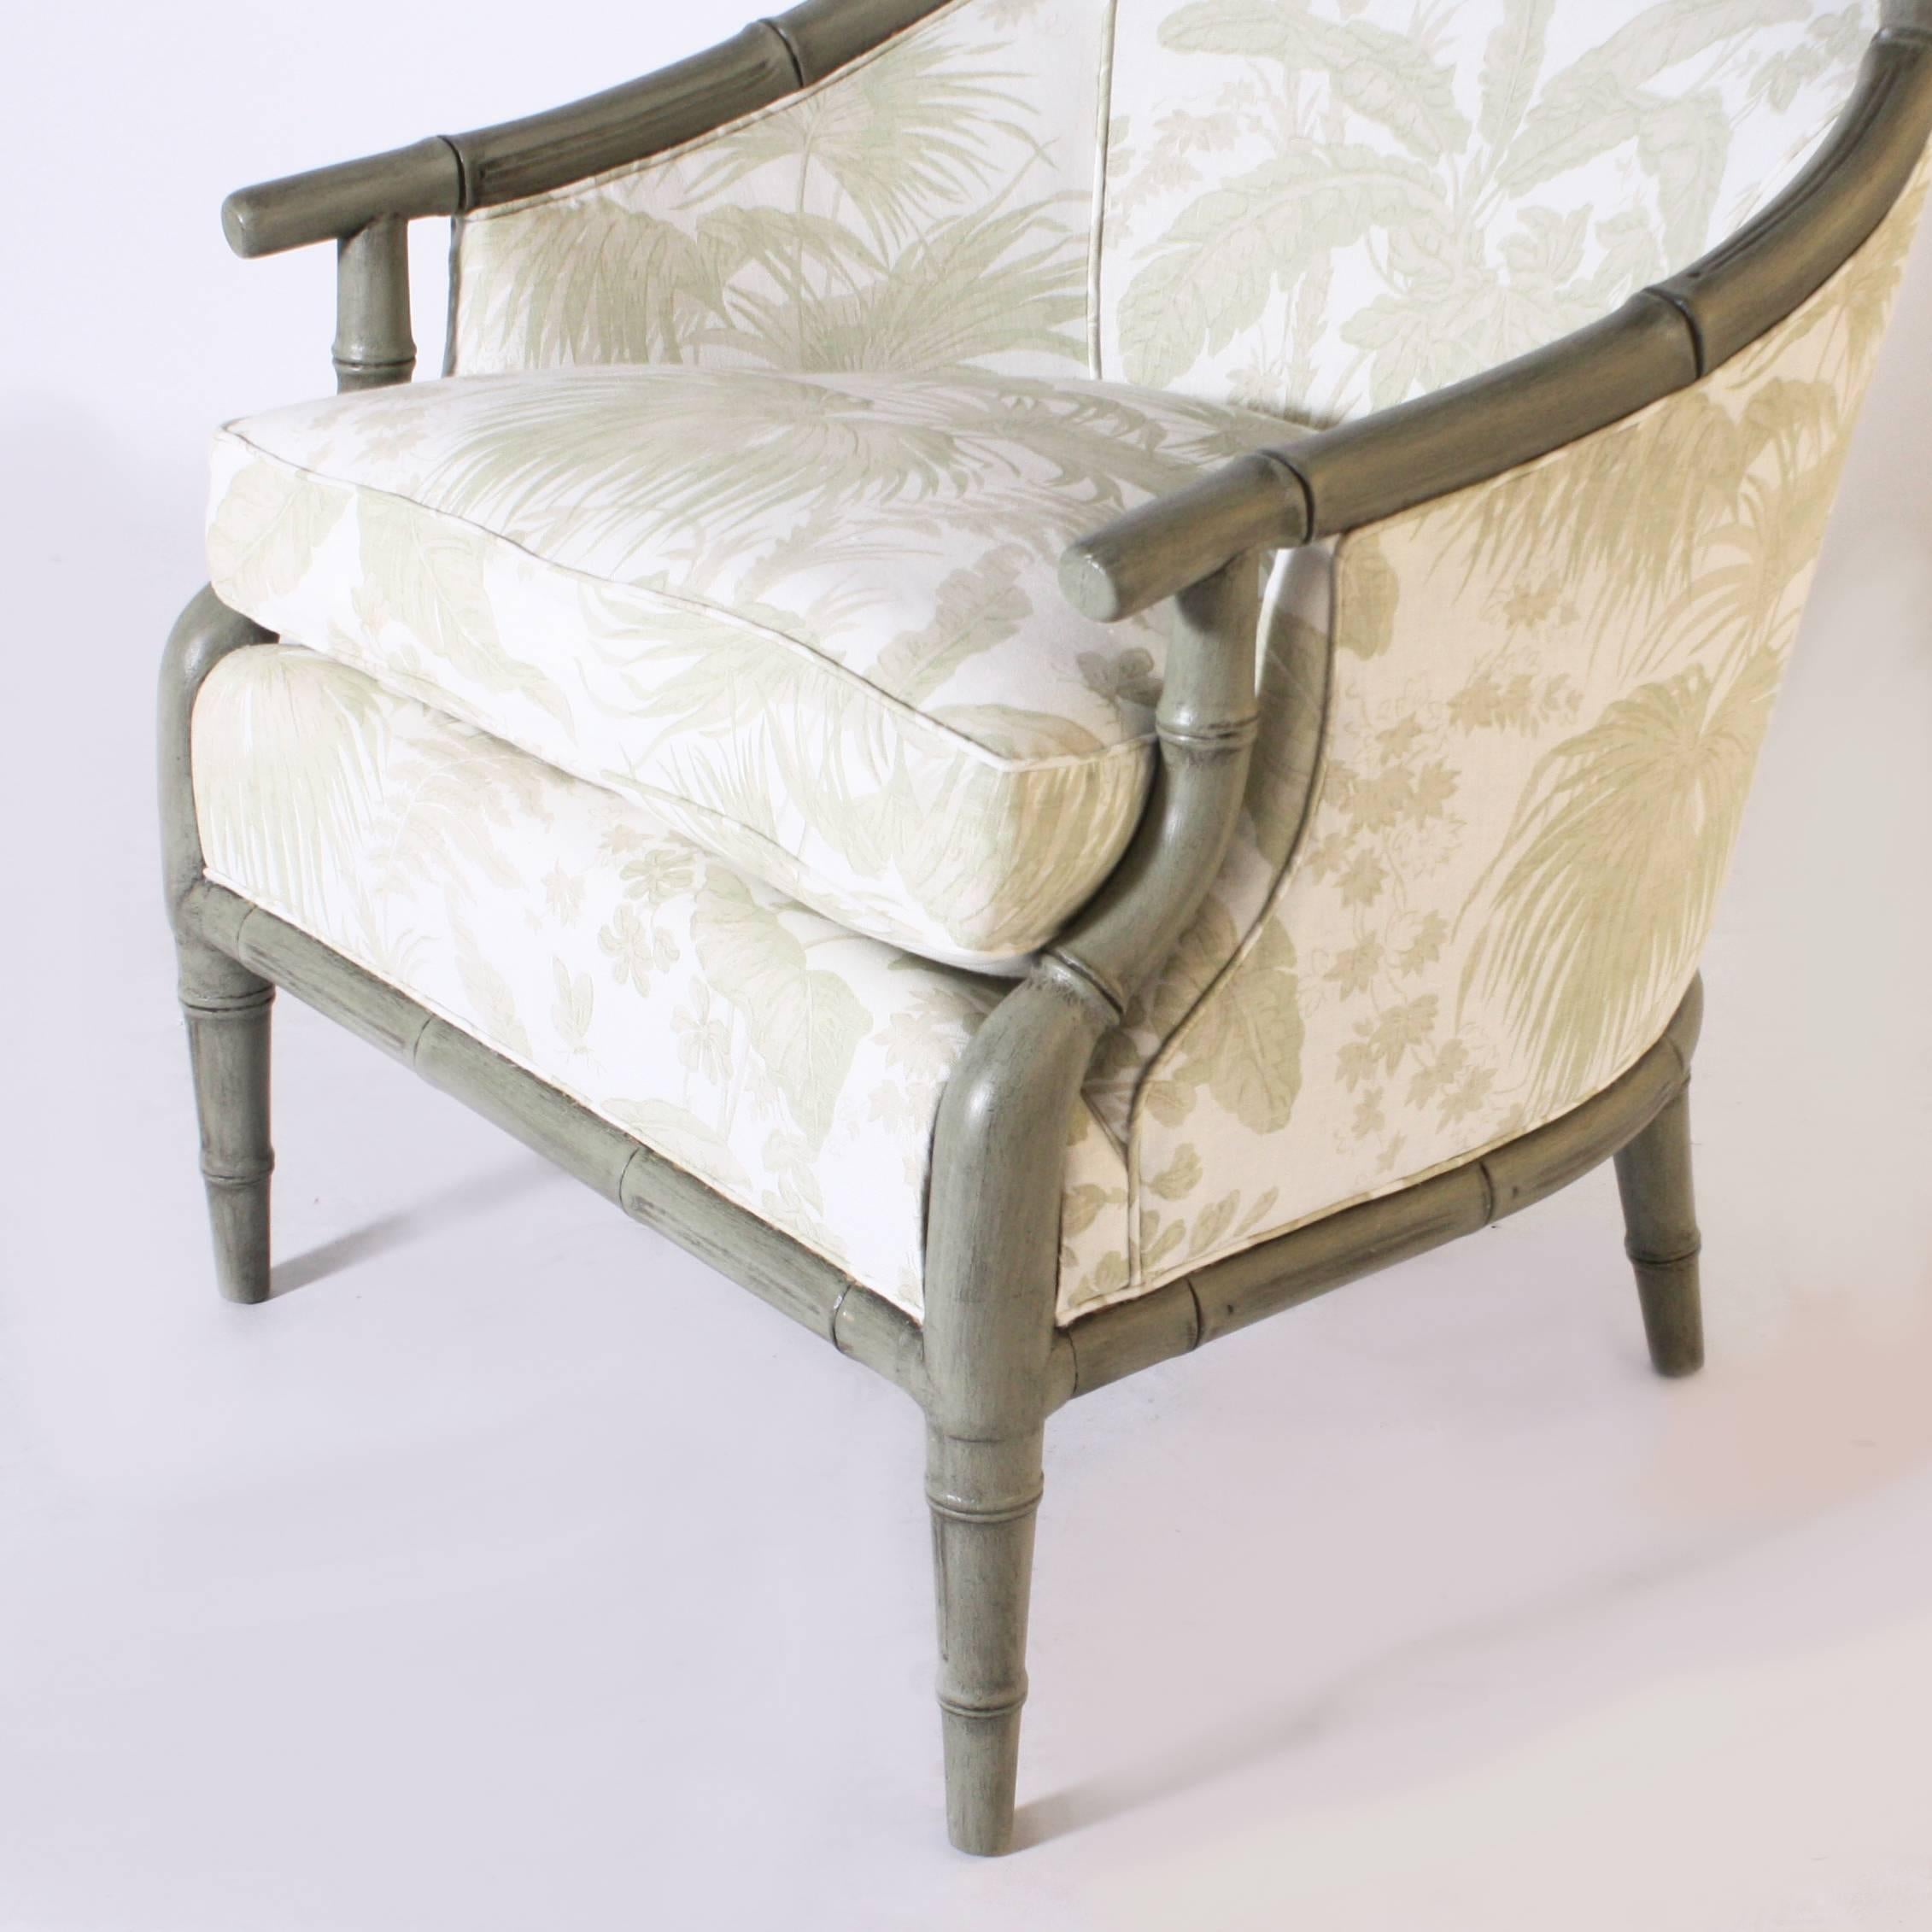 Pair of Faux Bamboo Chairs Upholstered in Jan Showers for Kravet Fabric 1